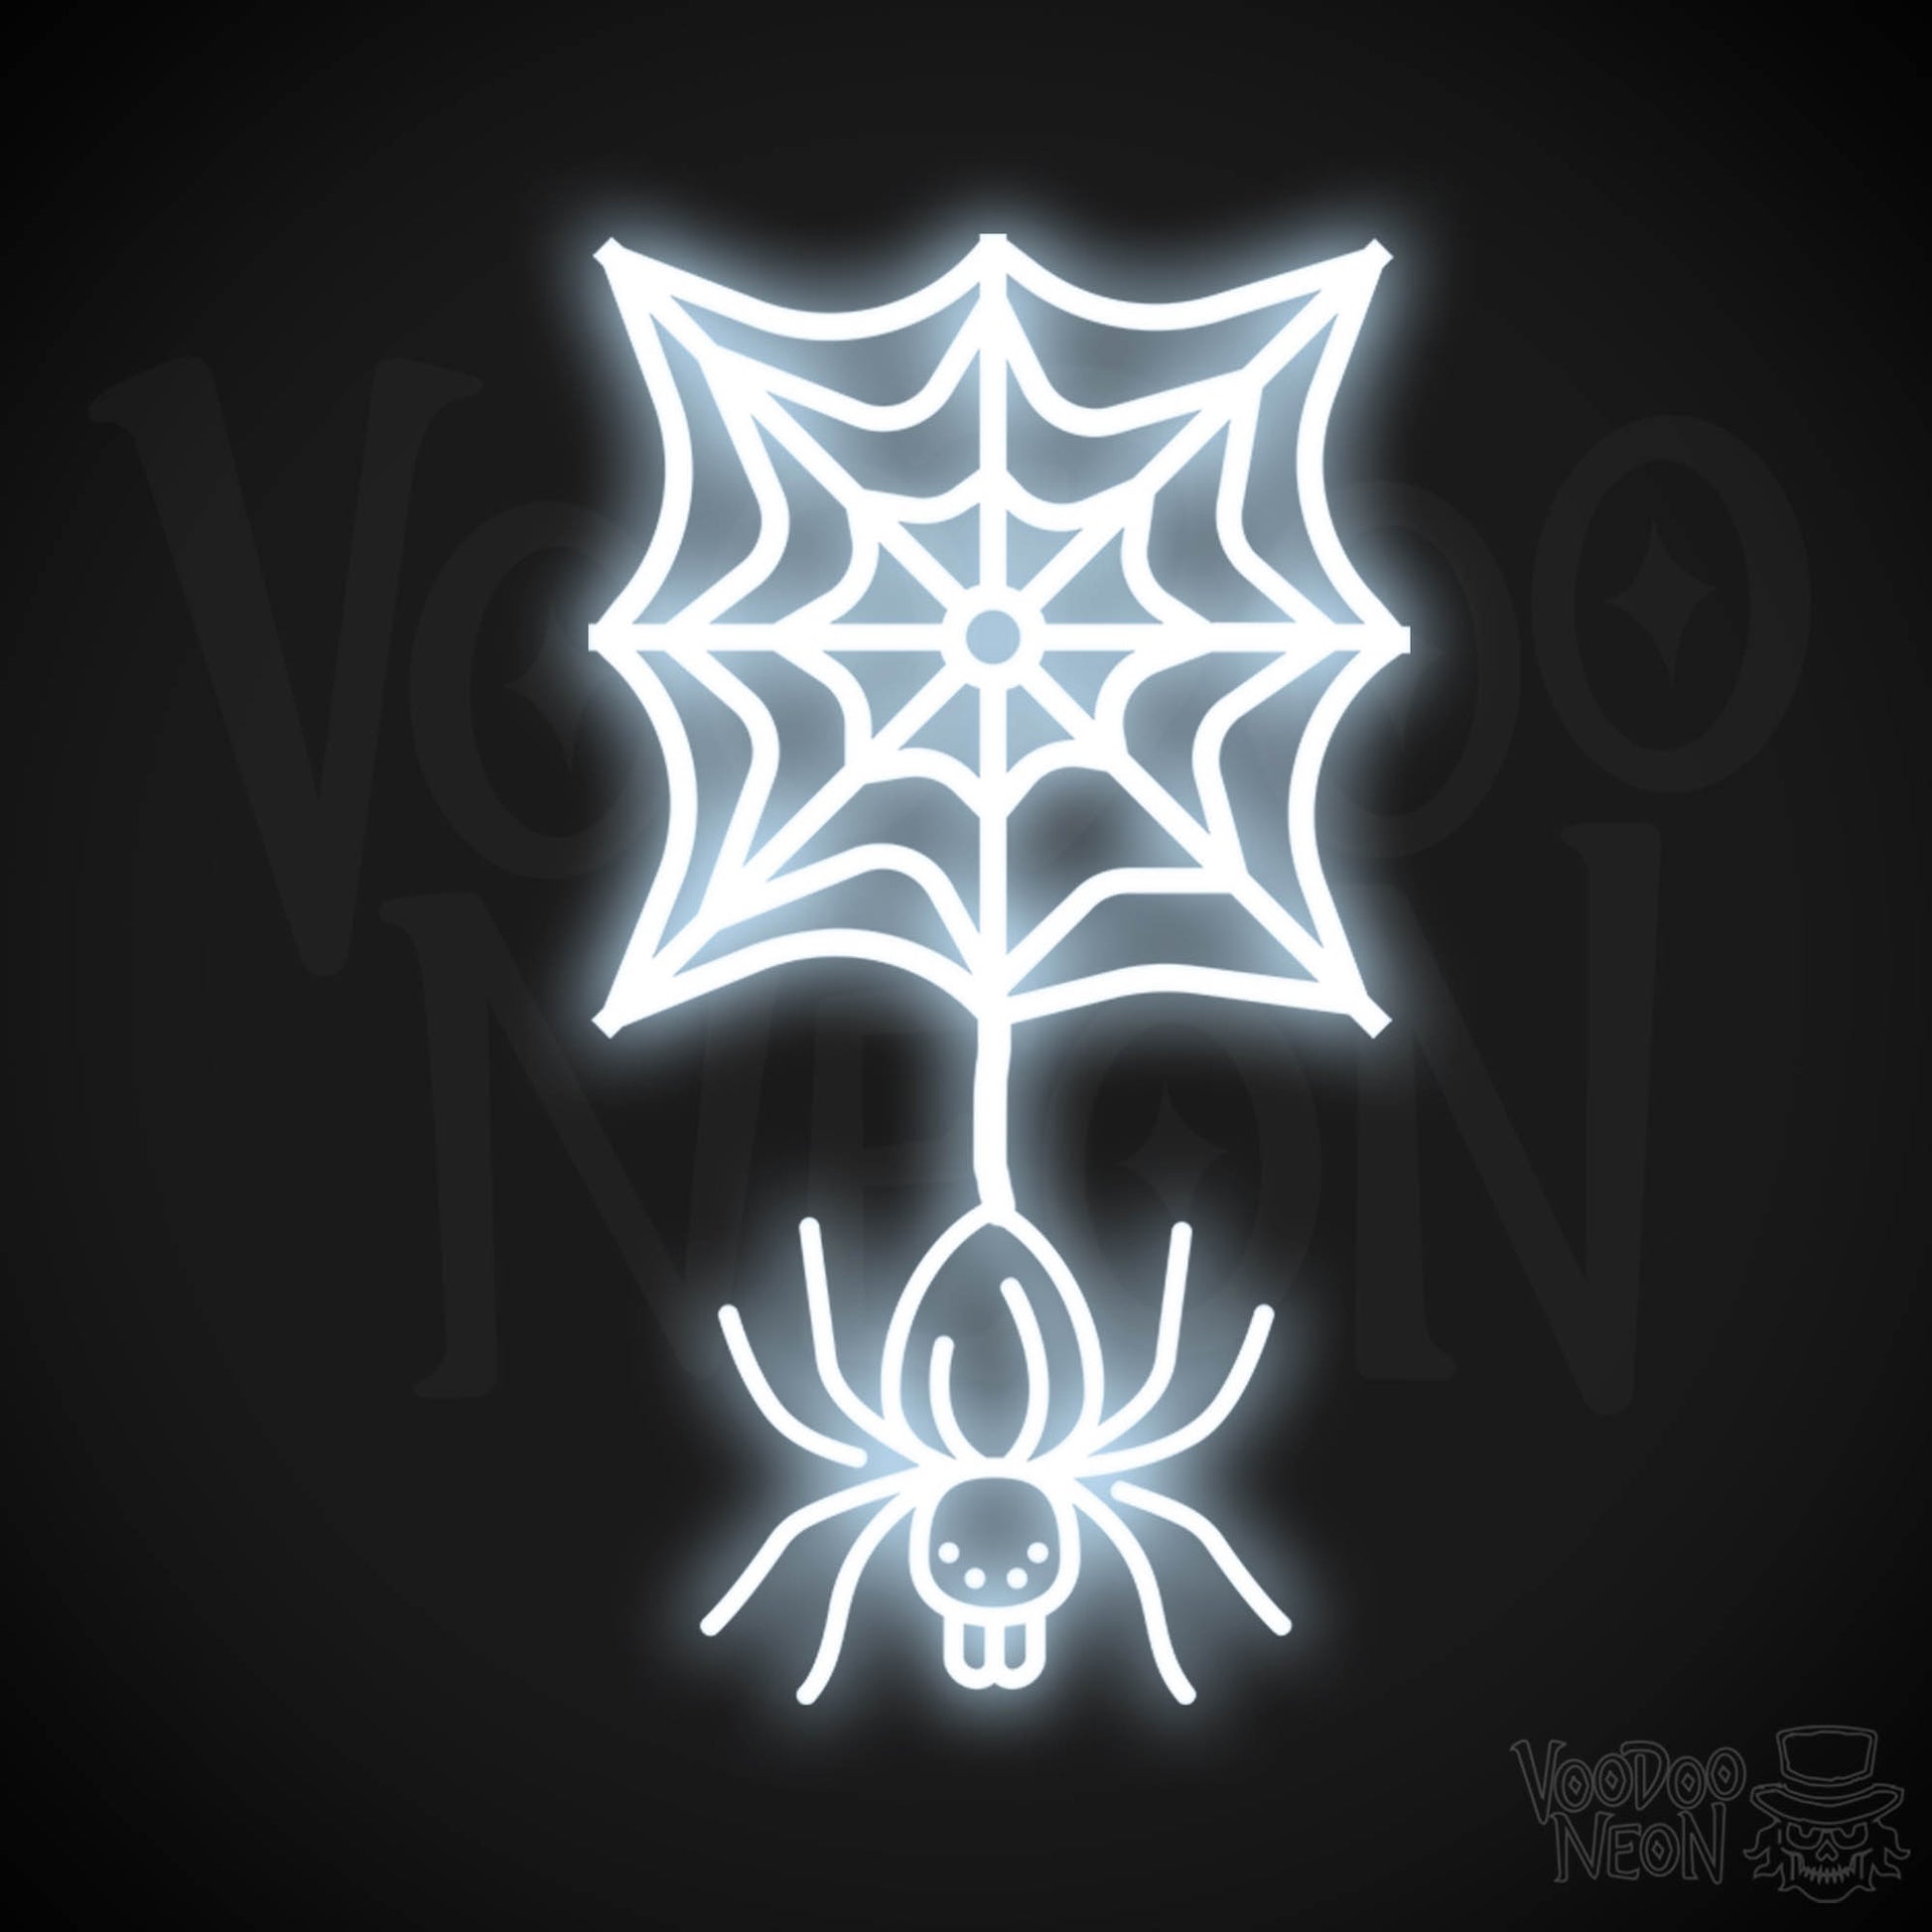 Neon Spider - Spider Neon Sign - Halloween LED Neon Spider - Color Cool White